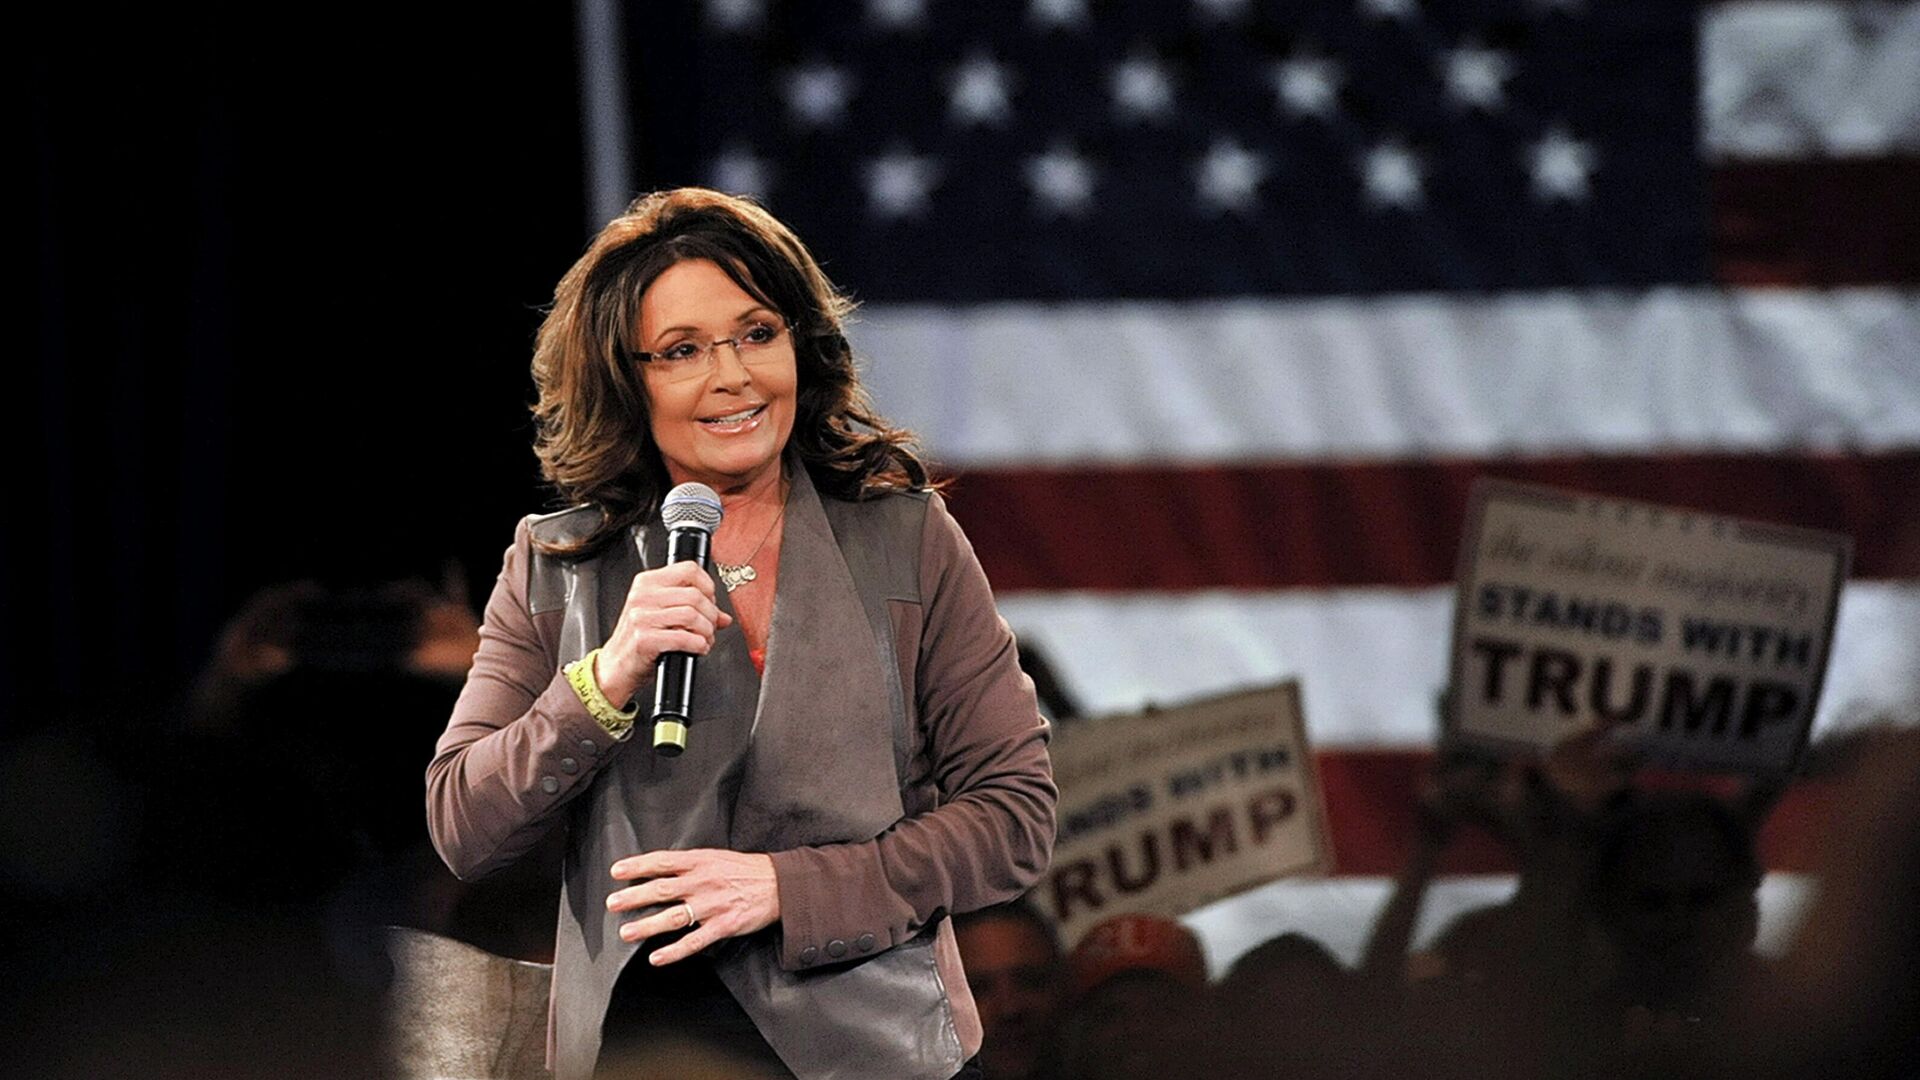 Former Alaska Governor Sarah Palin fires up the crowd before U.S. Republican presidential candidate Donald Trump arrive at a campaign rally at the Tampa Convention Center in Tampa, Florida March 14, 2016 - Sputnik International, 1920, 19.02.2022